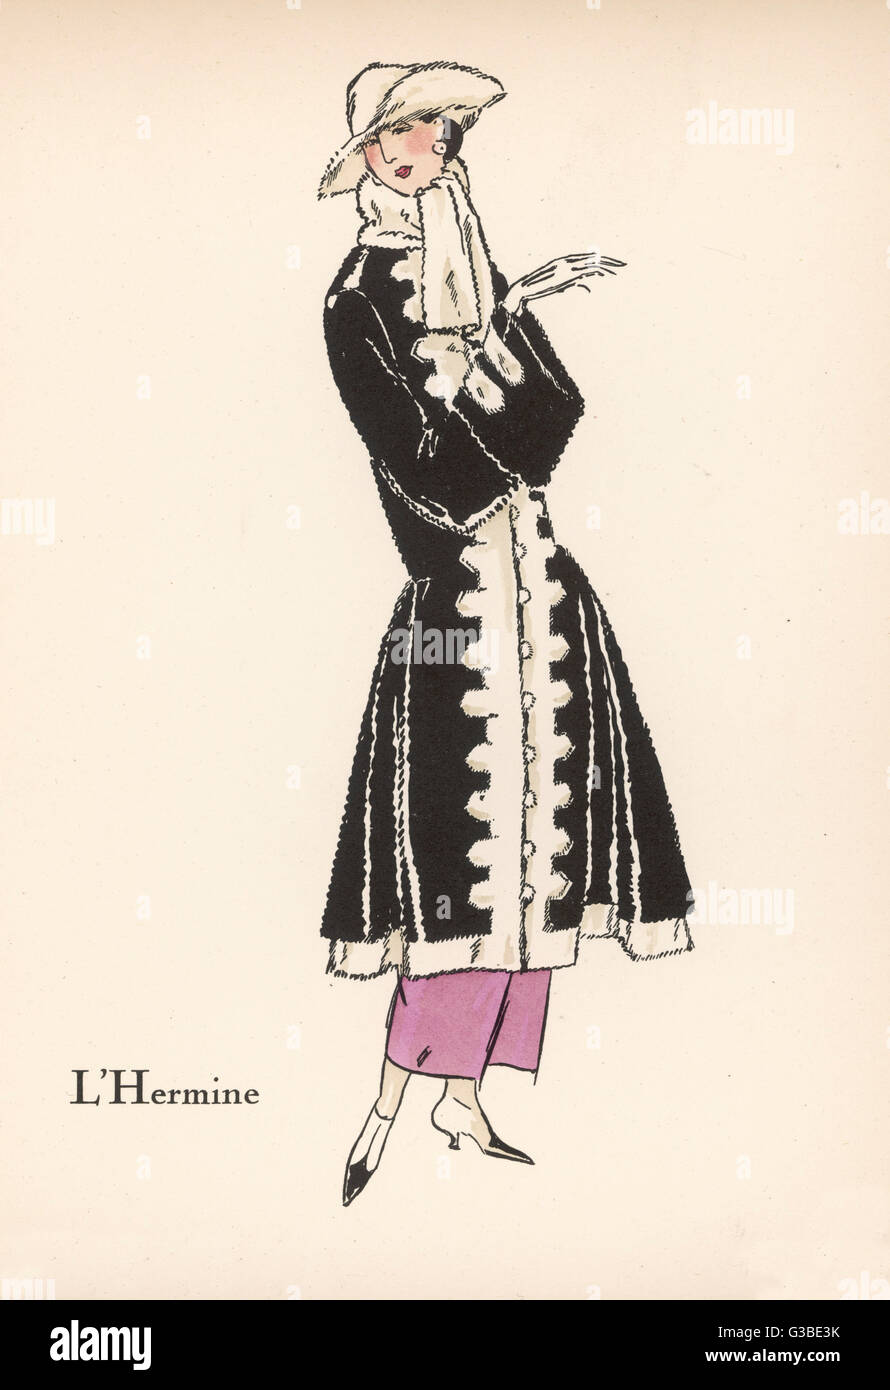 Ermine trimmed otter fur  coat with an 18th century feel  having boot cuffs &amp; imitation  brandenbourgs, a flared  skirts.  worn with a fur scarf  &amp; hat with a cocked brim.     Date: 1922 Stock Photo